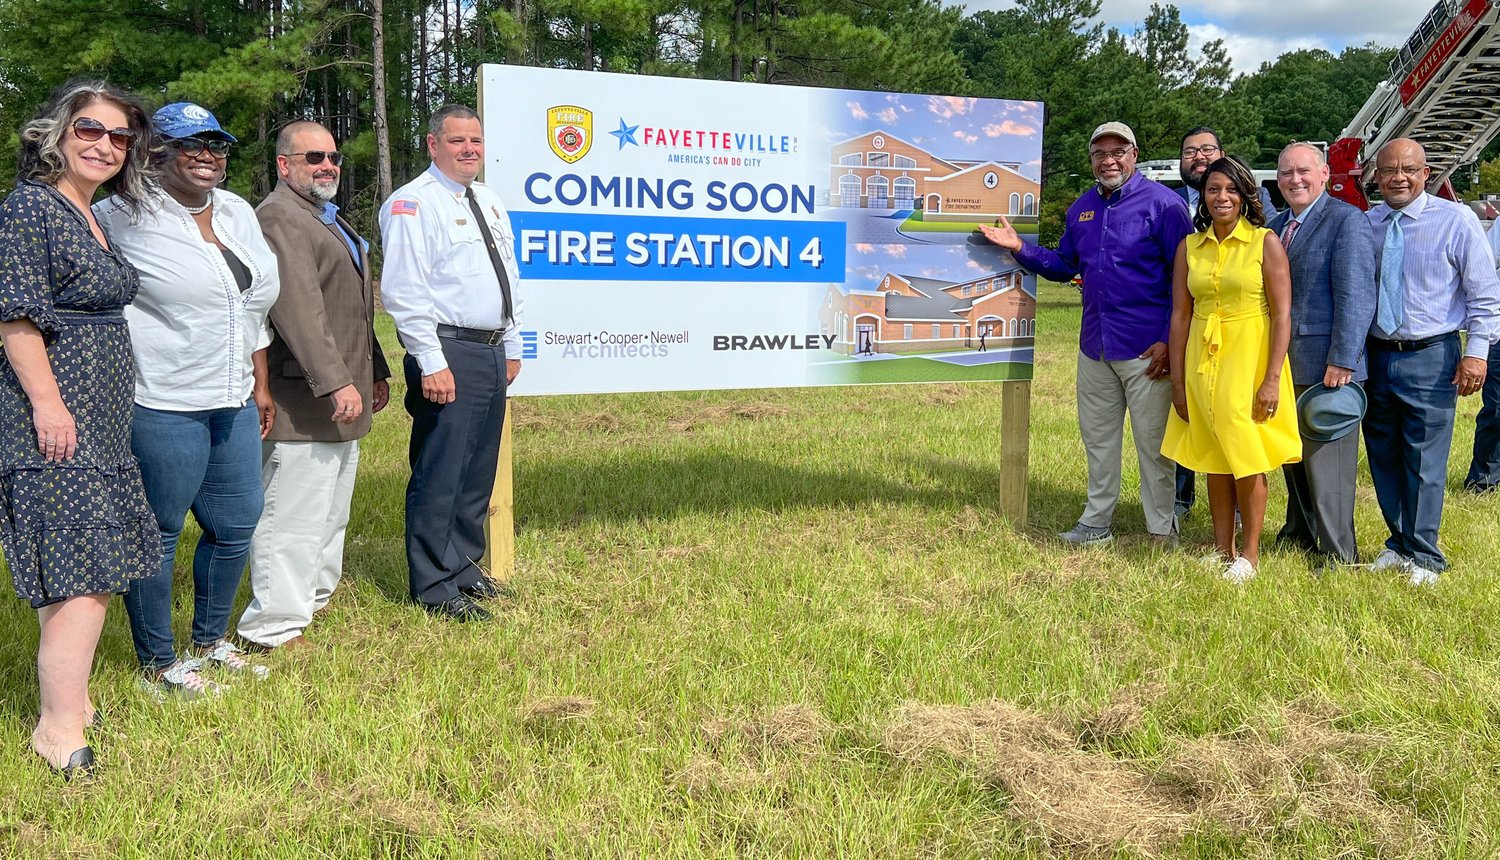 Fayetteville Fire Department officials and City Council members broke ground for a new Fire Station No. 4 on Bragg Boulevard on Tuesday.